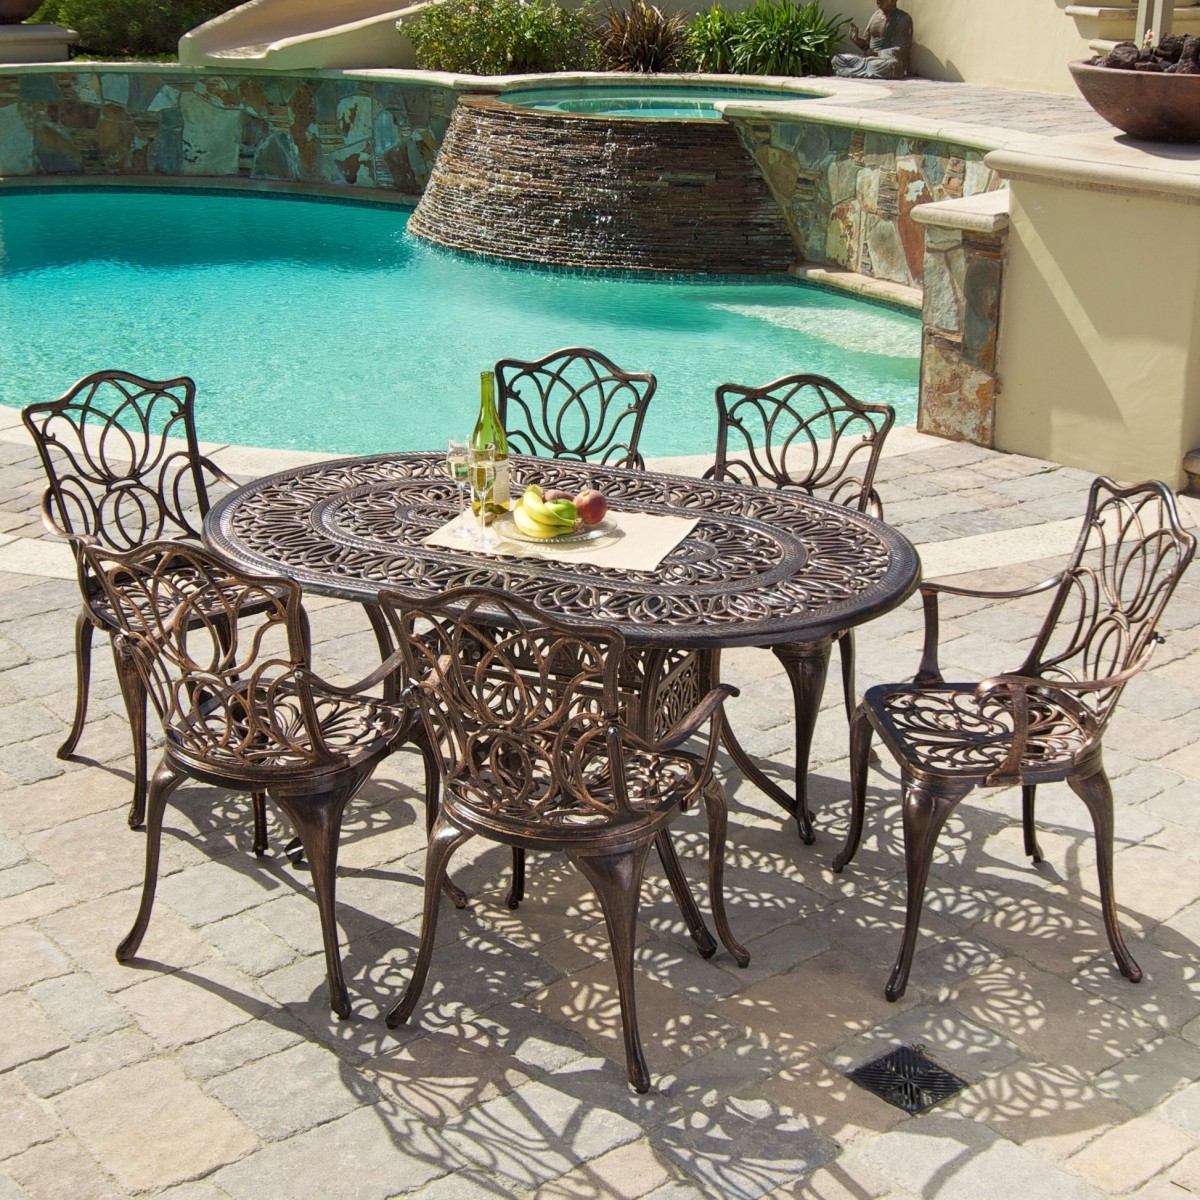 Gardena Cast Aluminum 7 Piece Outdoor Dining Set with Oval Table